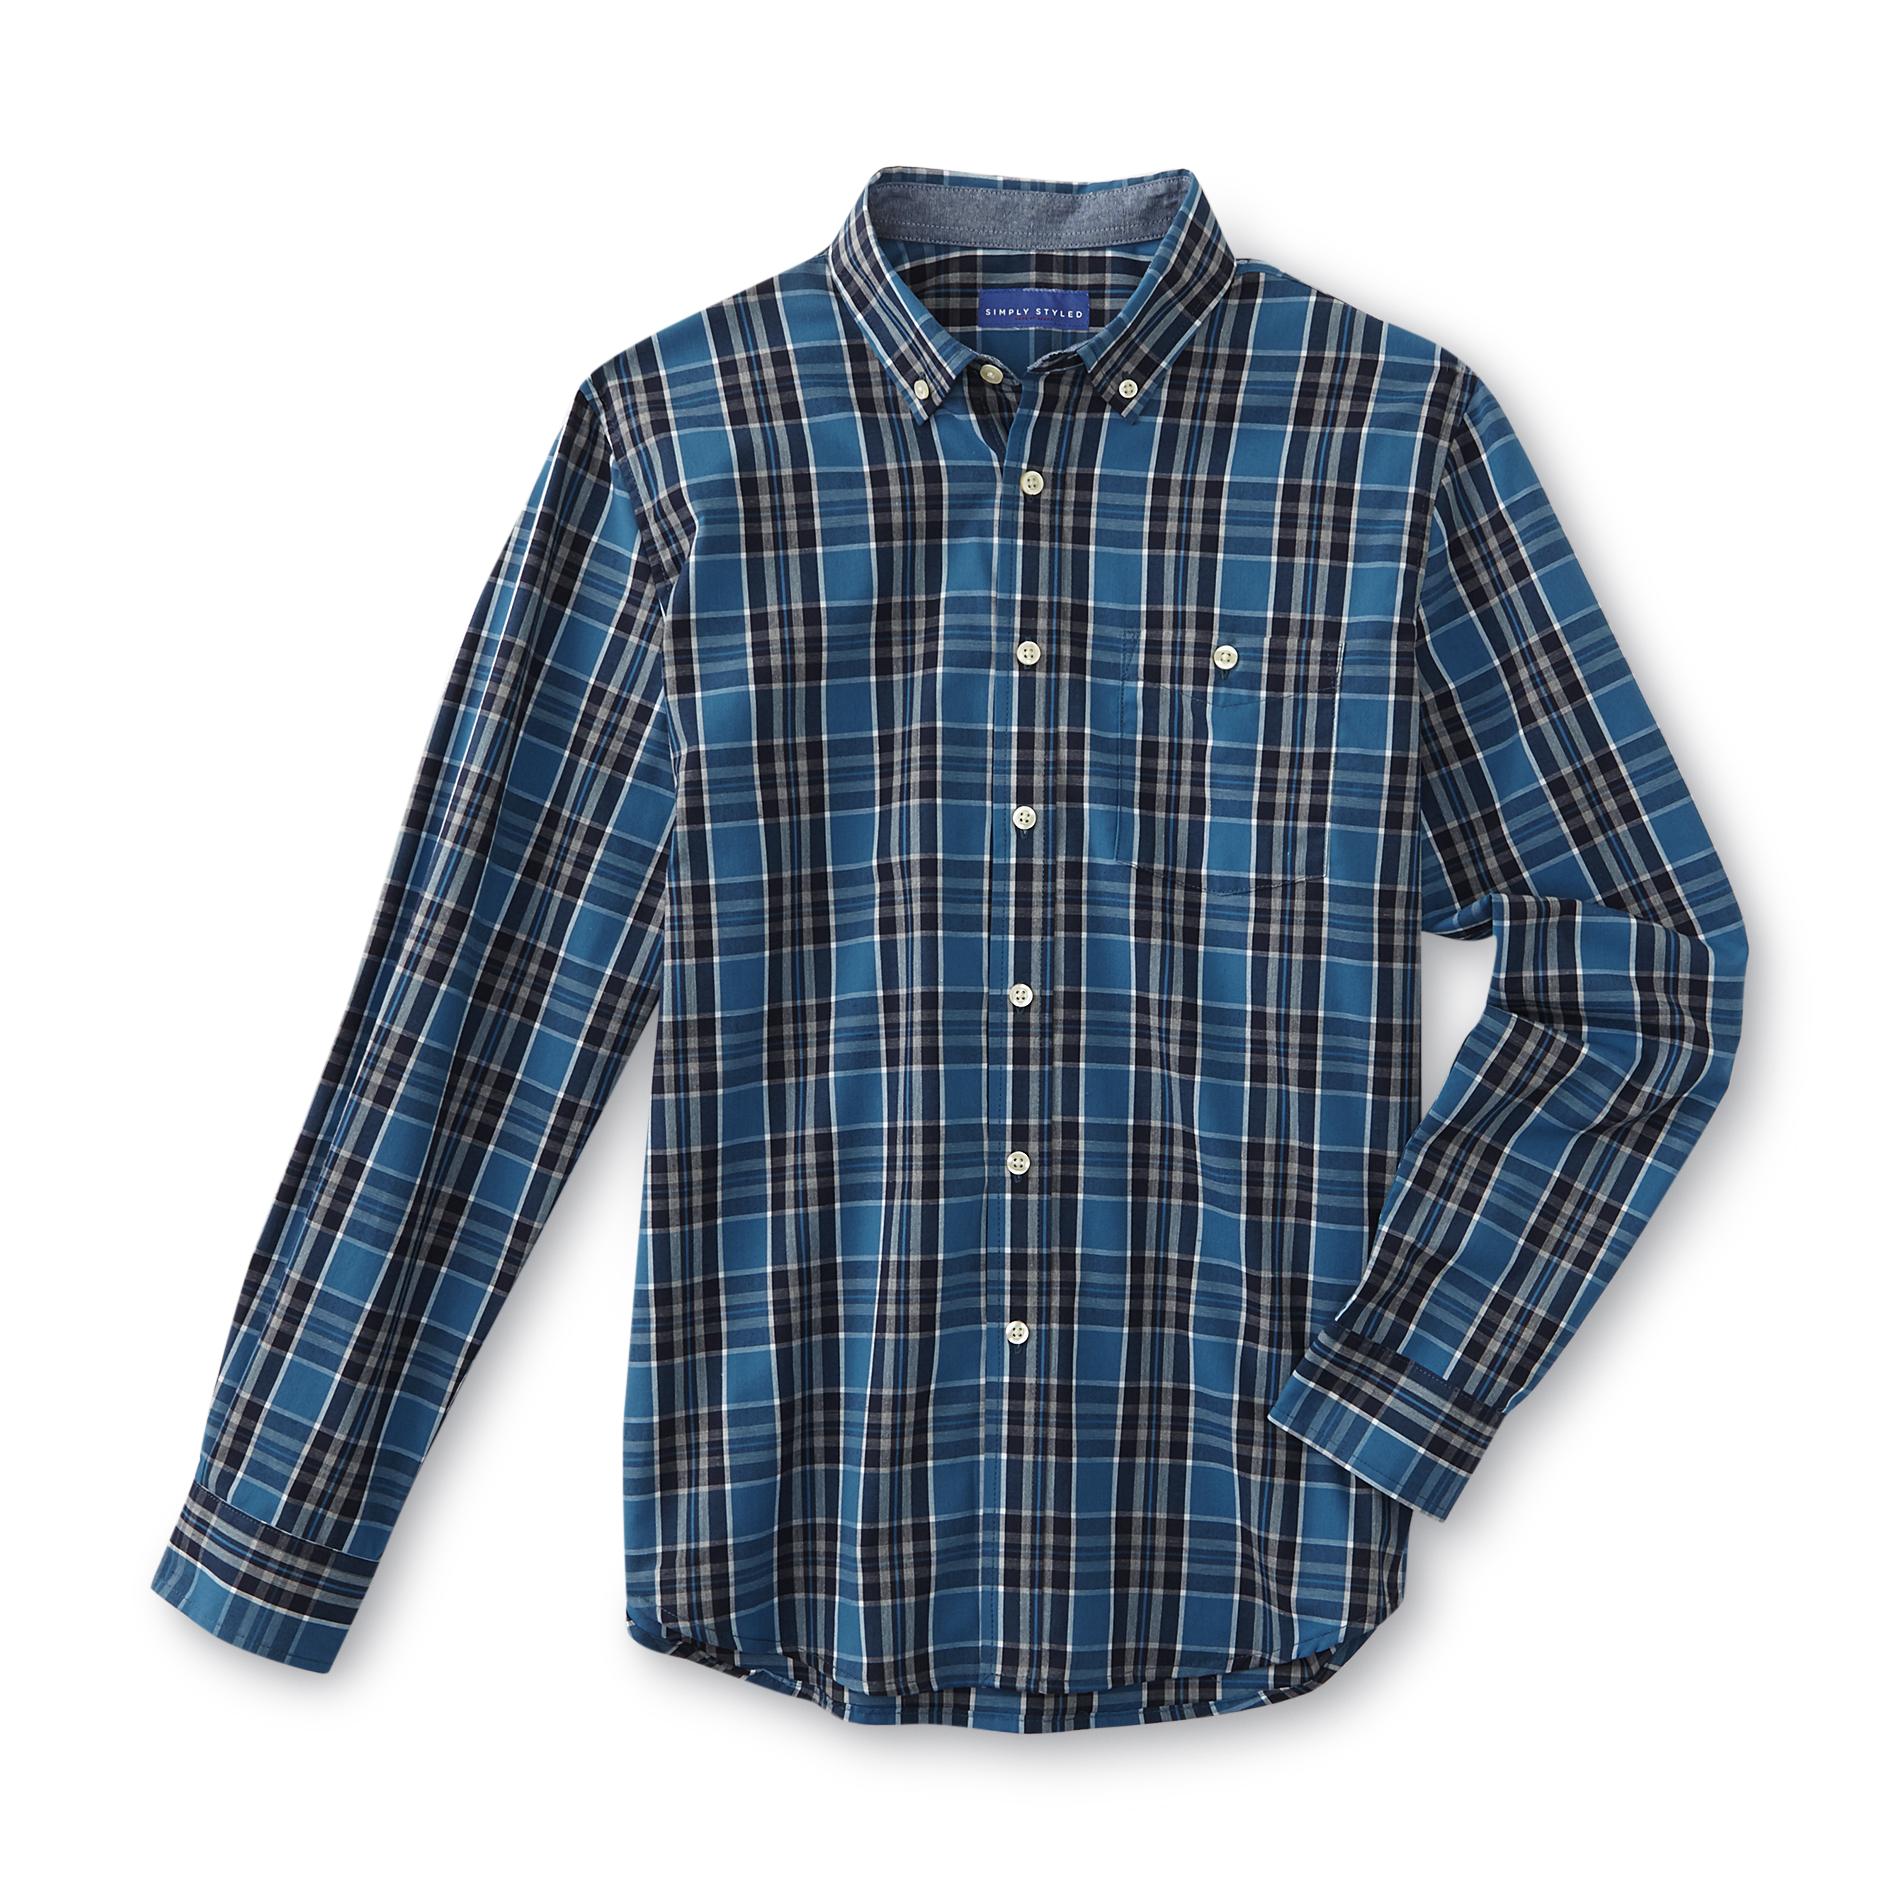 Simply Styled Men's Woven Shirt - Plaid